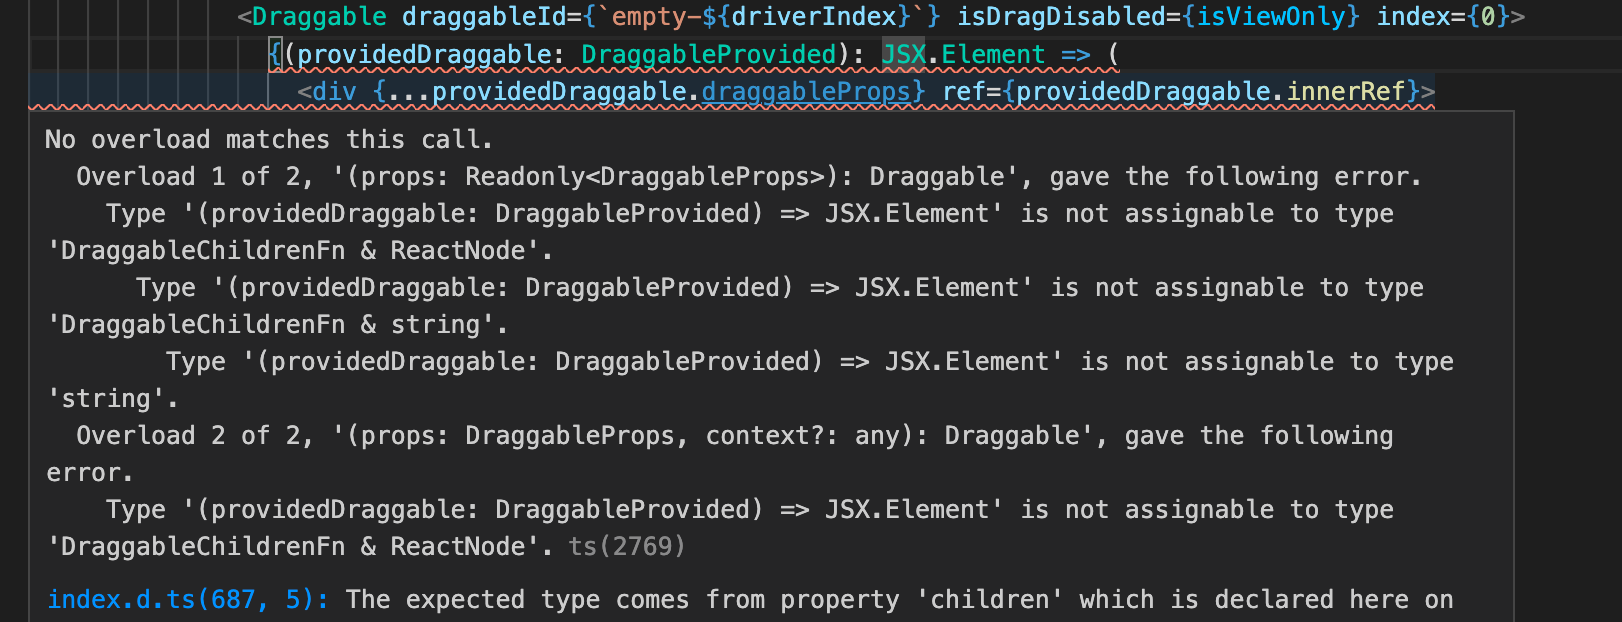 Error message on a '<Draggable>' component showing 'No overload matches this call.' and various type errors with JSX.Element not being assignable to a type of DraggableChildrenFn & ReactNode